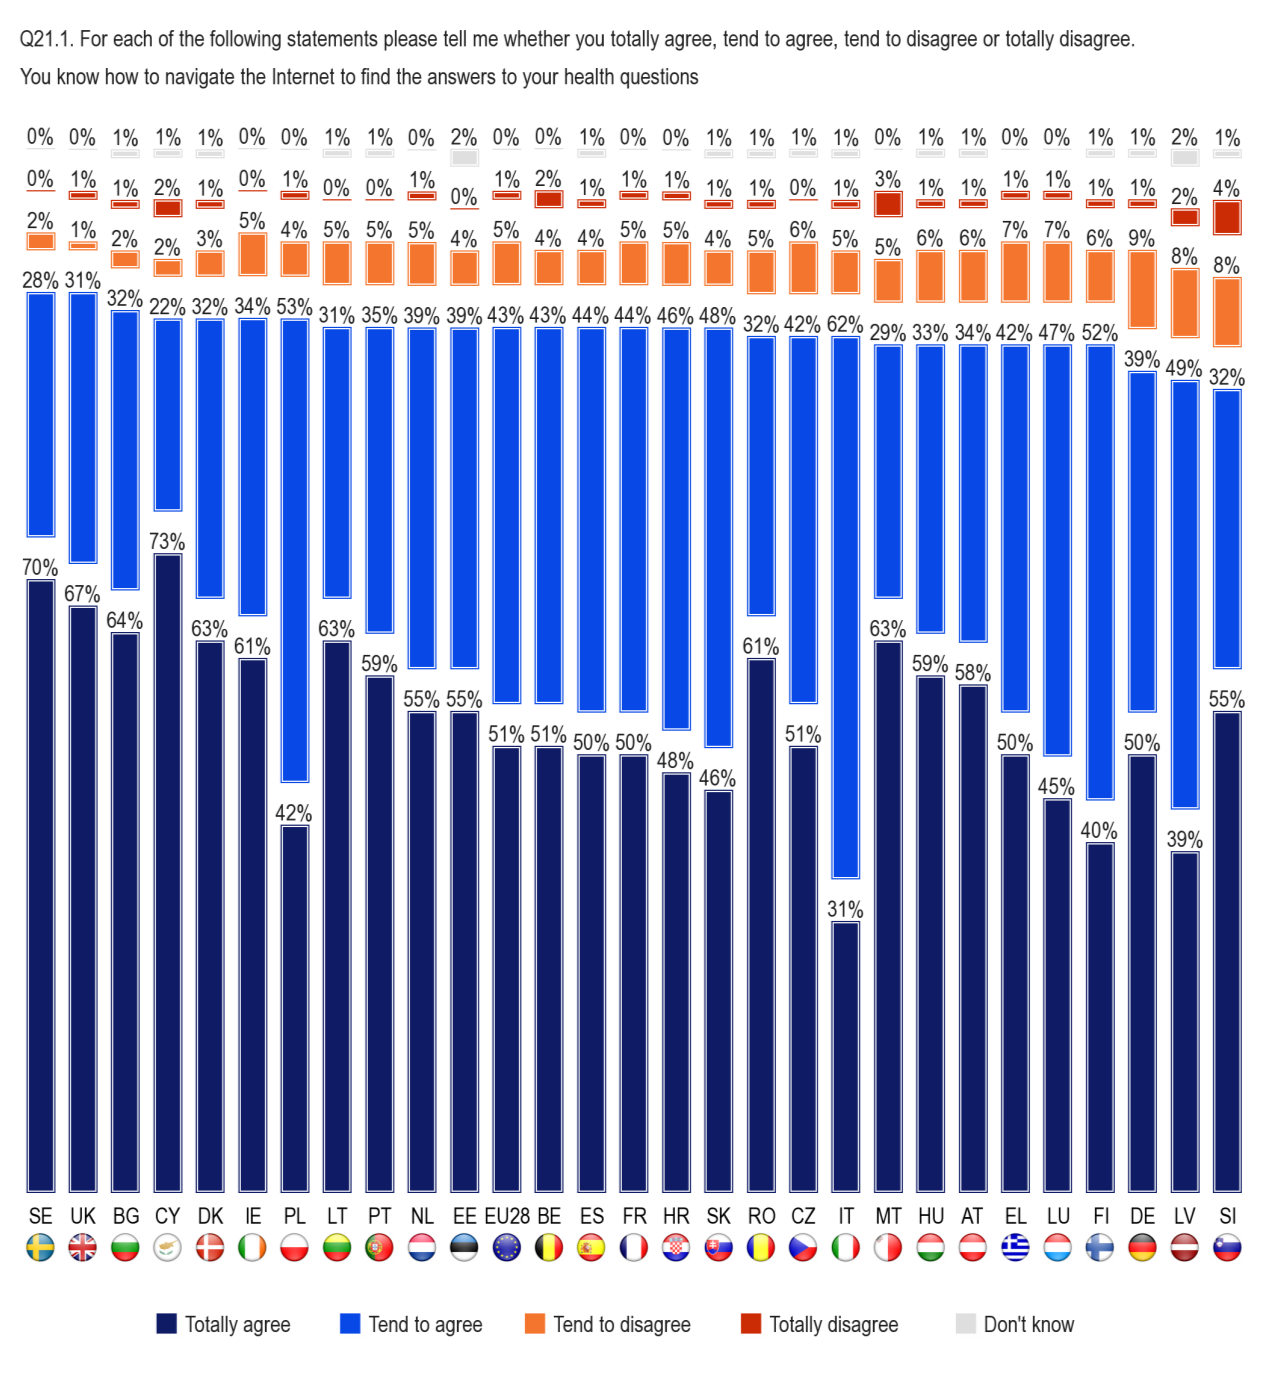 FLASH EUROBAROMETER In all but three Member States, more than nine out of ten respondents agree that they know how to navigate the Internet to find answers to their health-related questions, with the